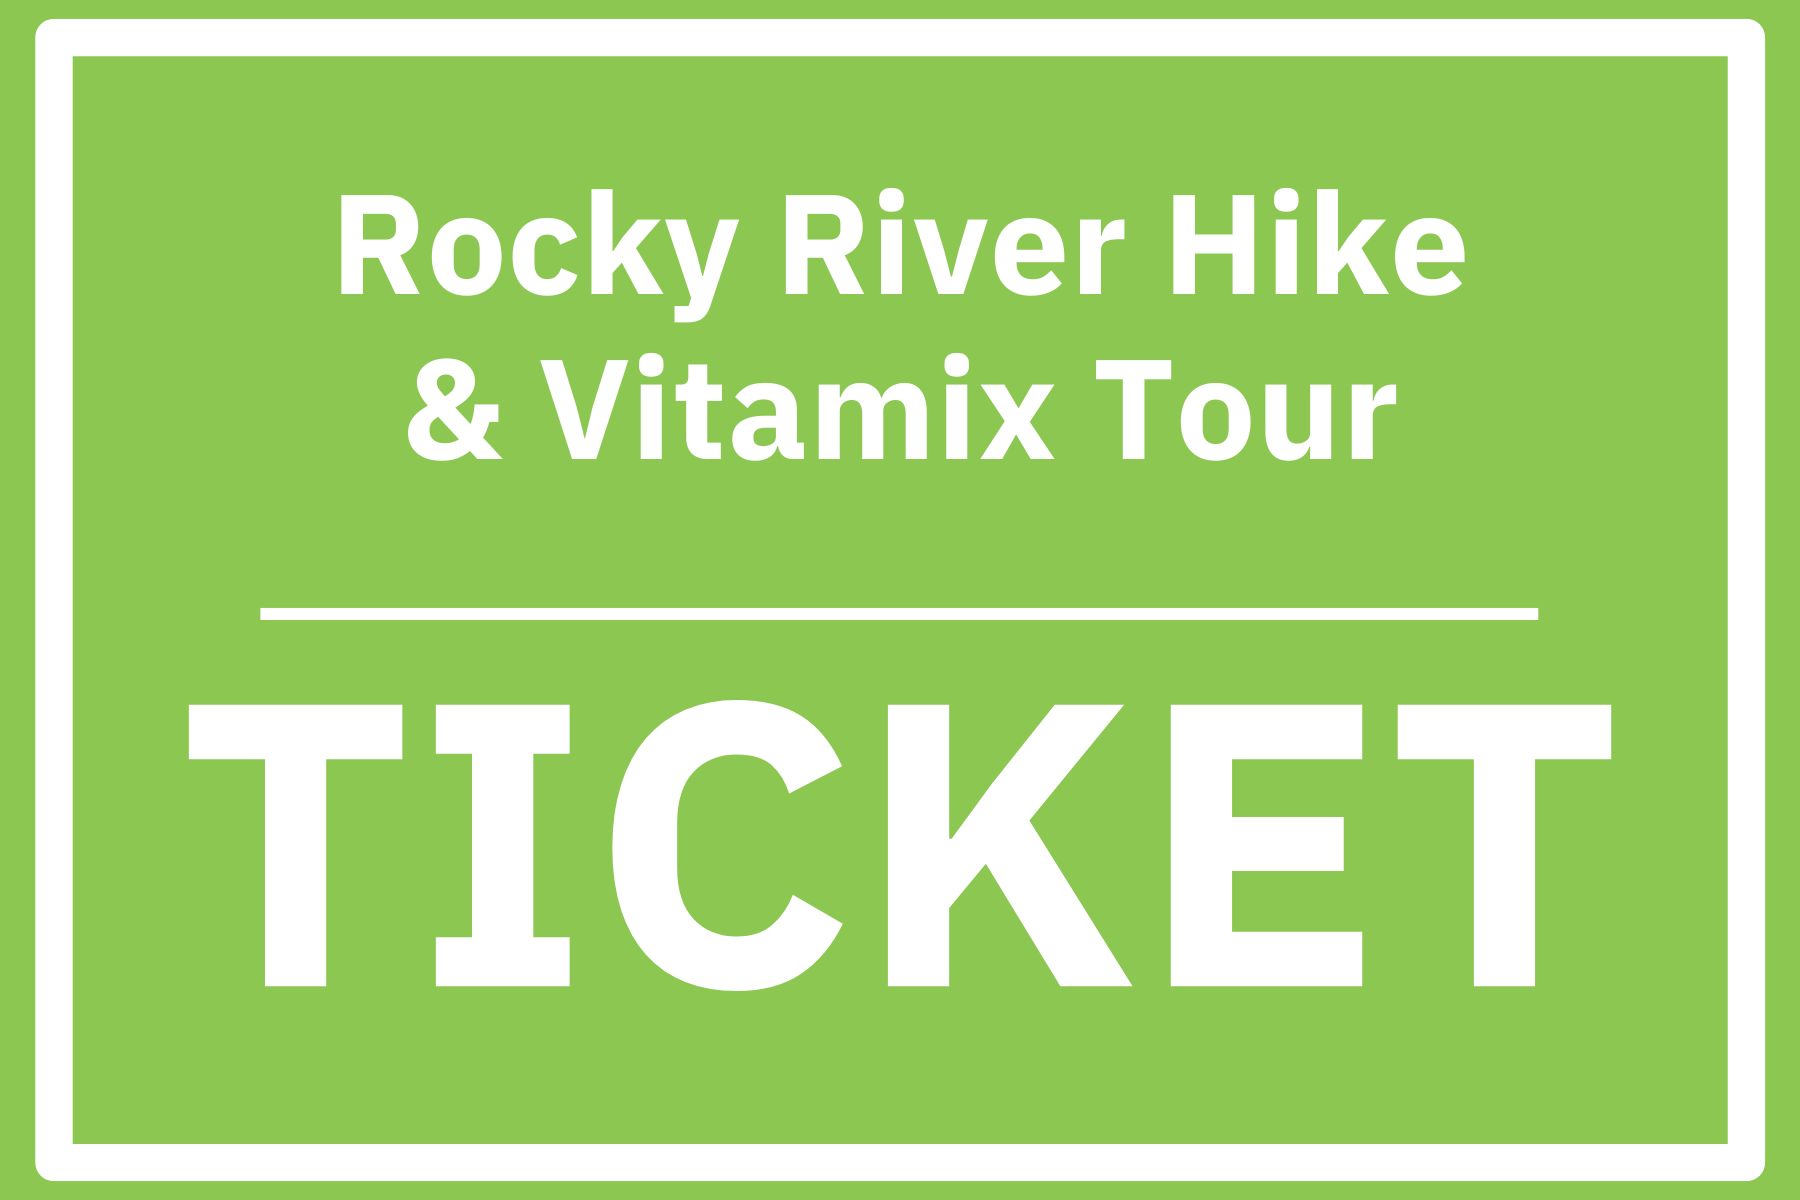 Rocky River Hike – Easy and Vitamix Tour